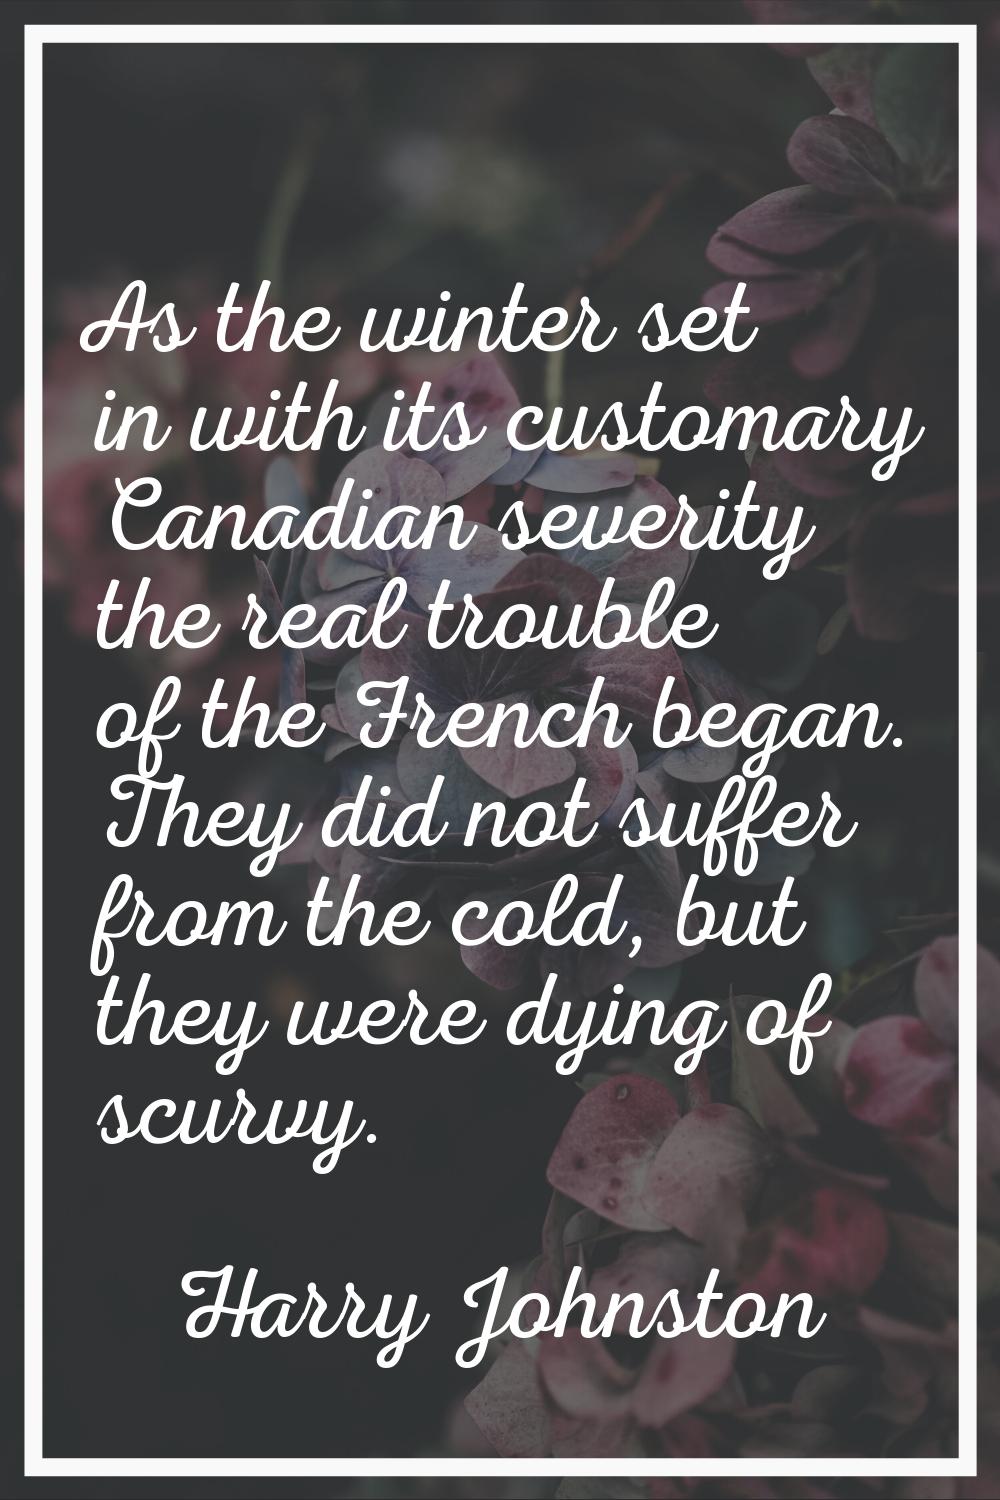 As the winter set in with its customary Canadian severity the real trouble of the French began. The